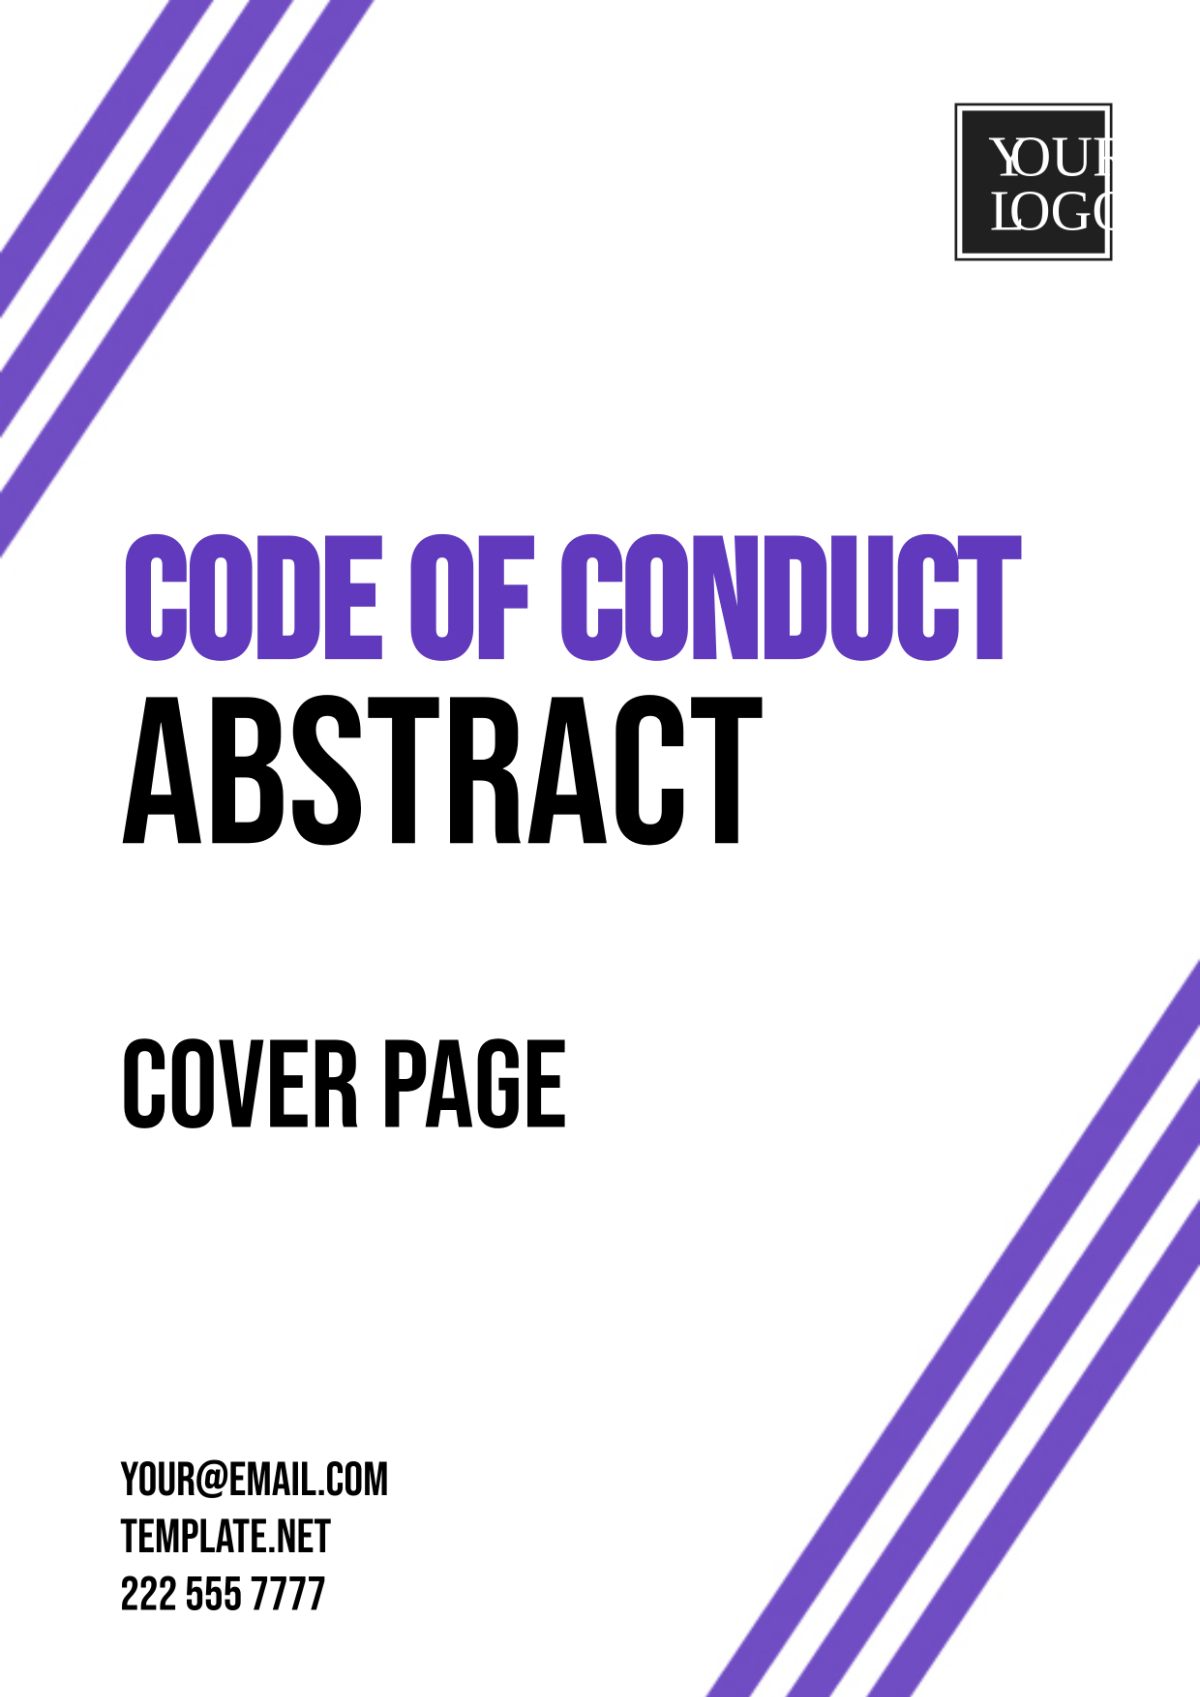 Free Code of Conduct Abstract Cover Page Template